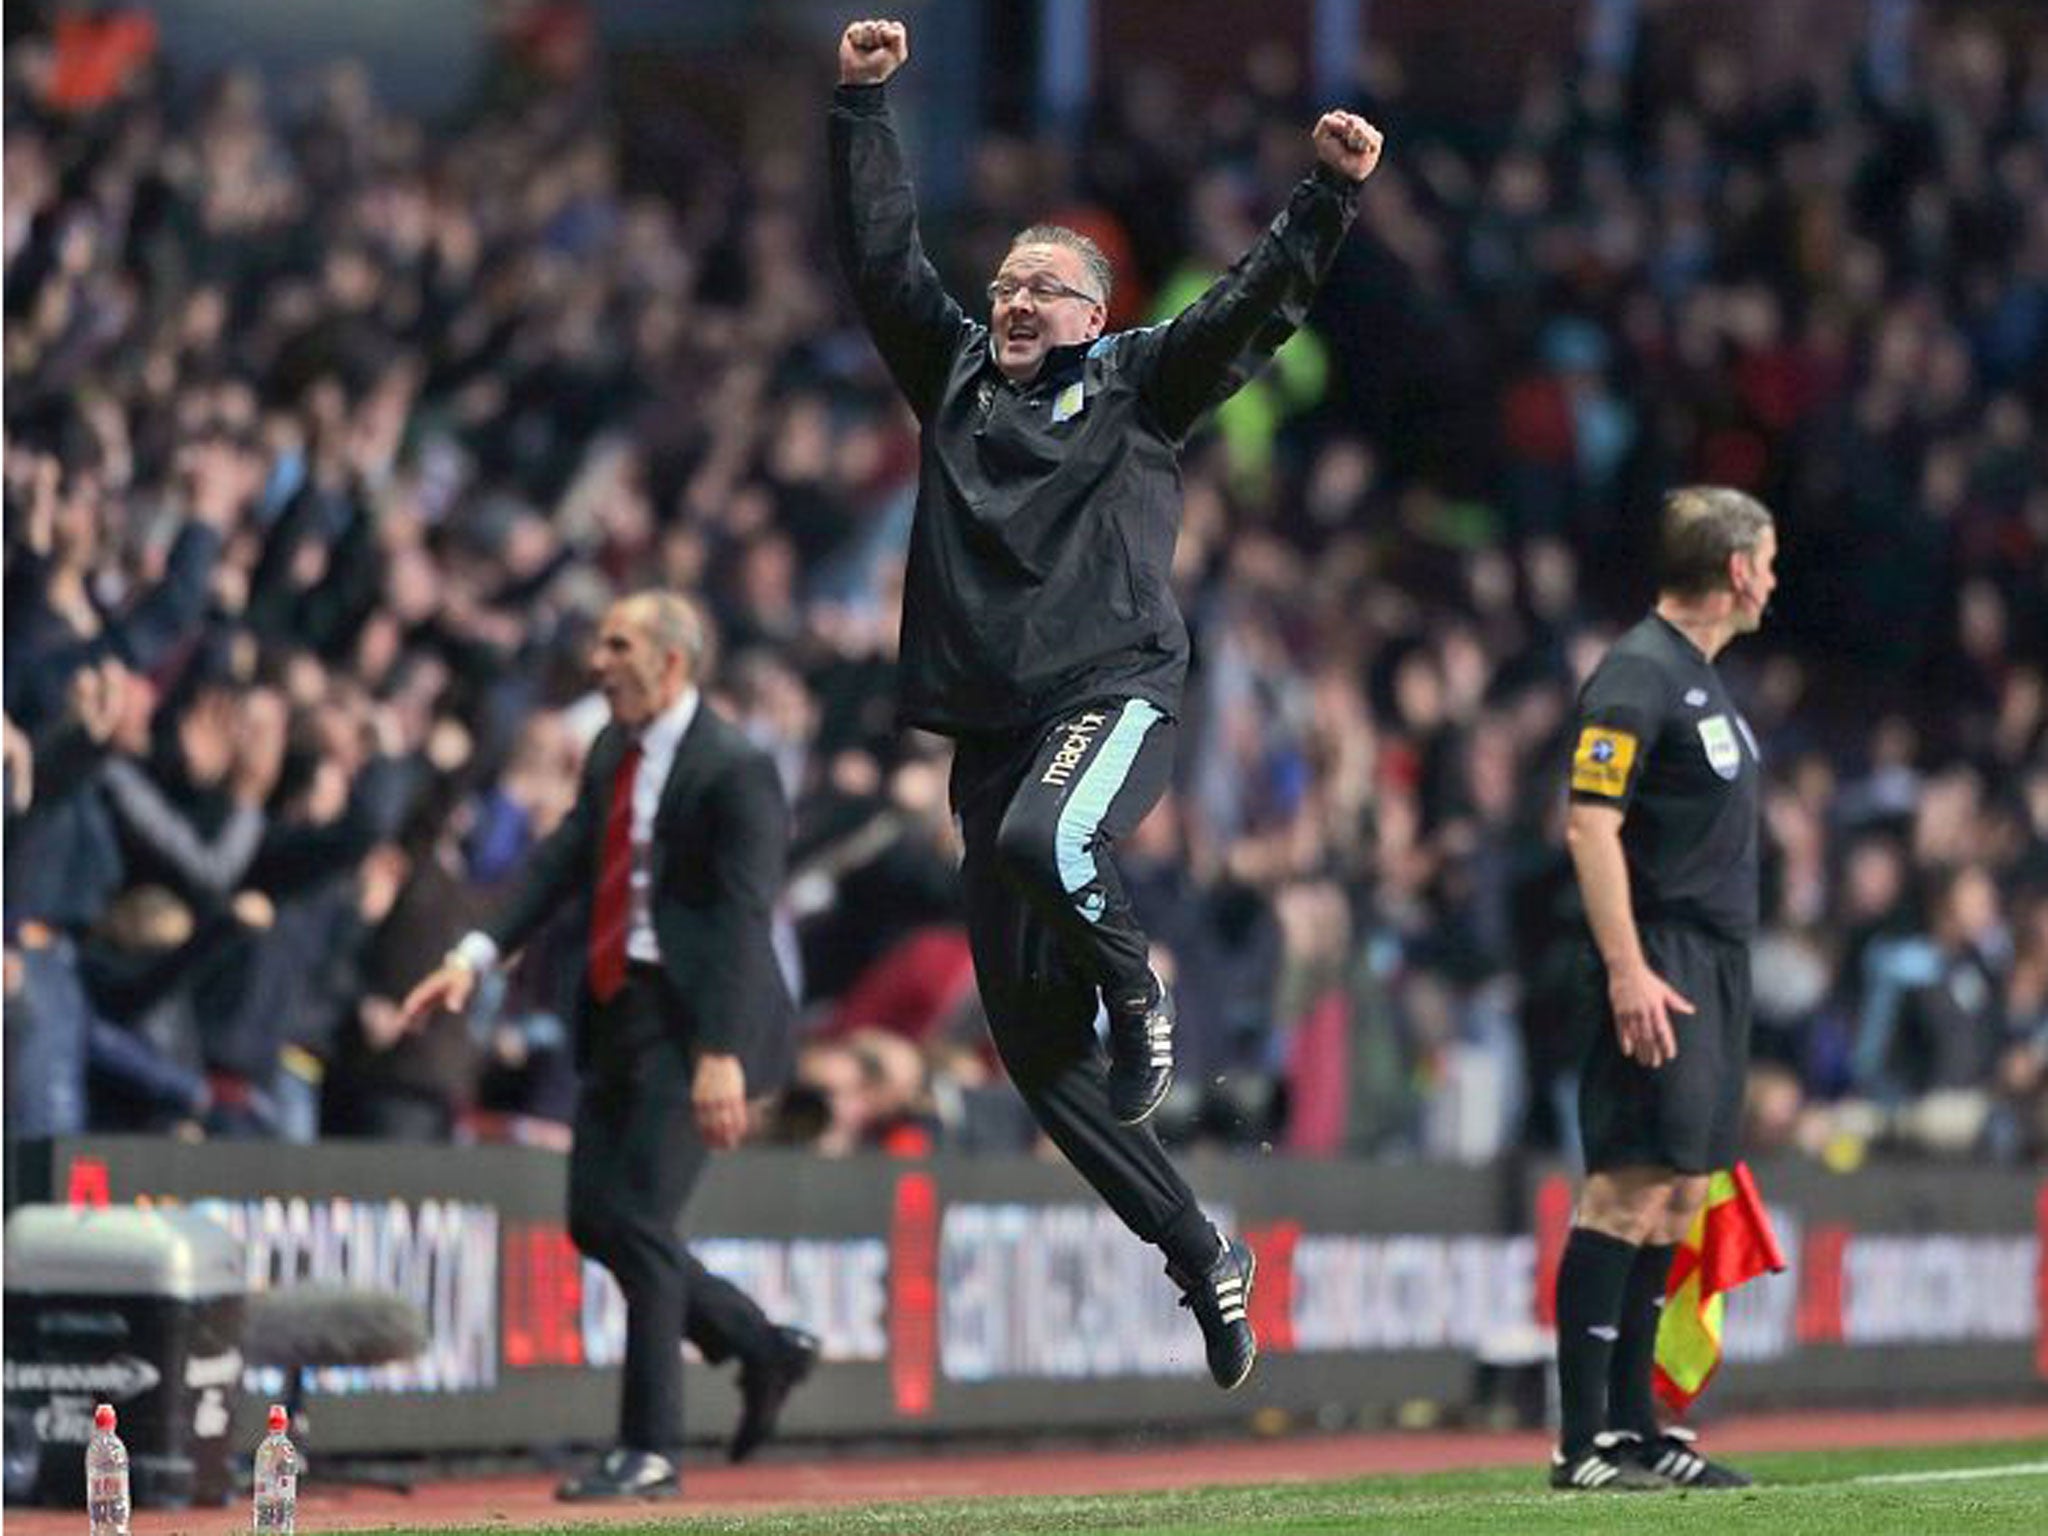 Aston Villa manager Paul Lambert, centre, celebrates on the touchline after Ron Vlaar scores his side's first goal of the game against Sunderland during the English Premier League soccer match at Villa Park, Birmingham